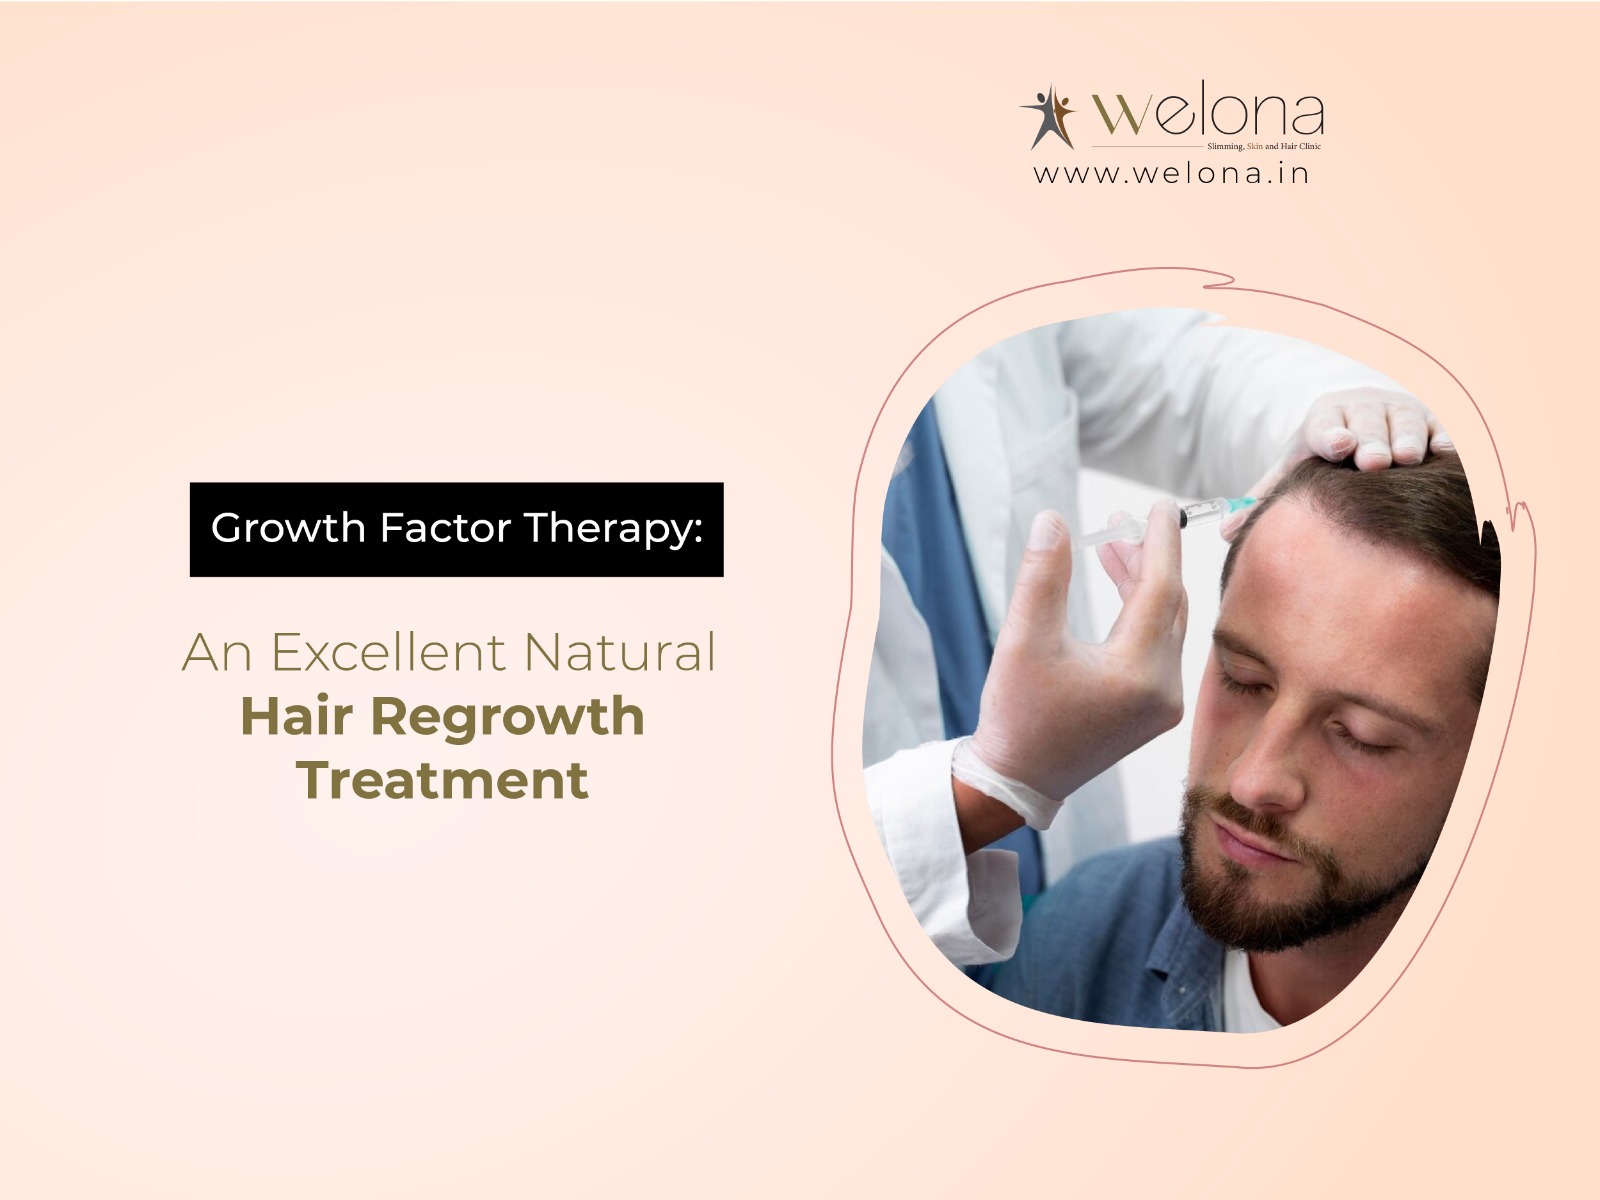 GFC Therapy: An Excellent Natural Hair Regrowth Treatment